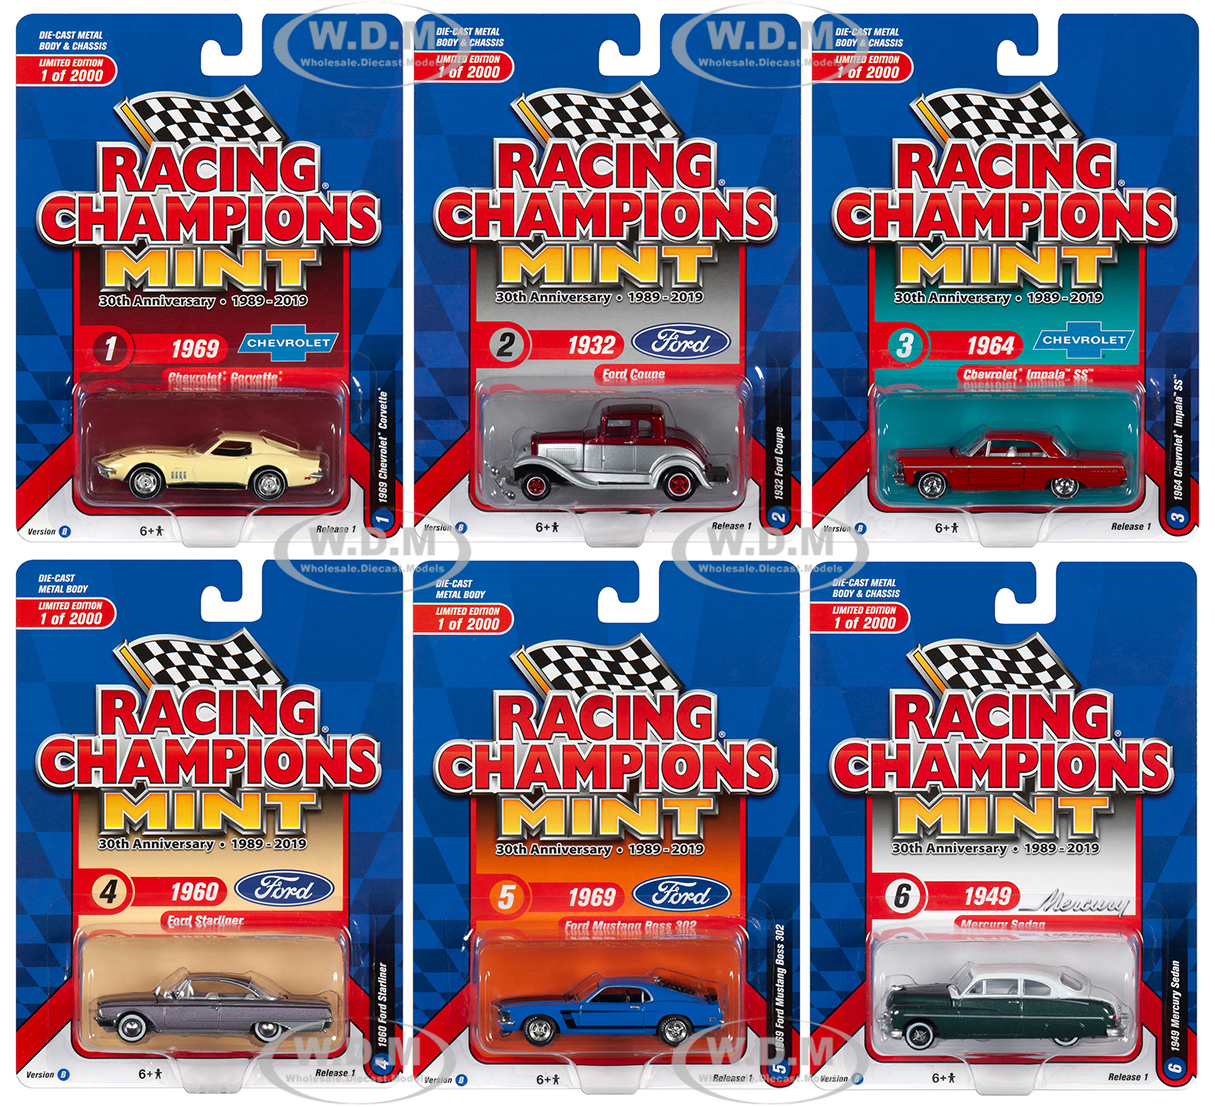 2019 Mint Release 1 Set B of 6 Cars "30th Anniversary" (1989-2019) Limited Edition to 2000 pieces Worldwide 1/64 Diecast Models by Racing Champions